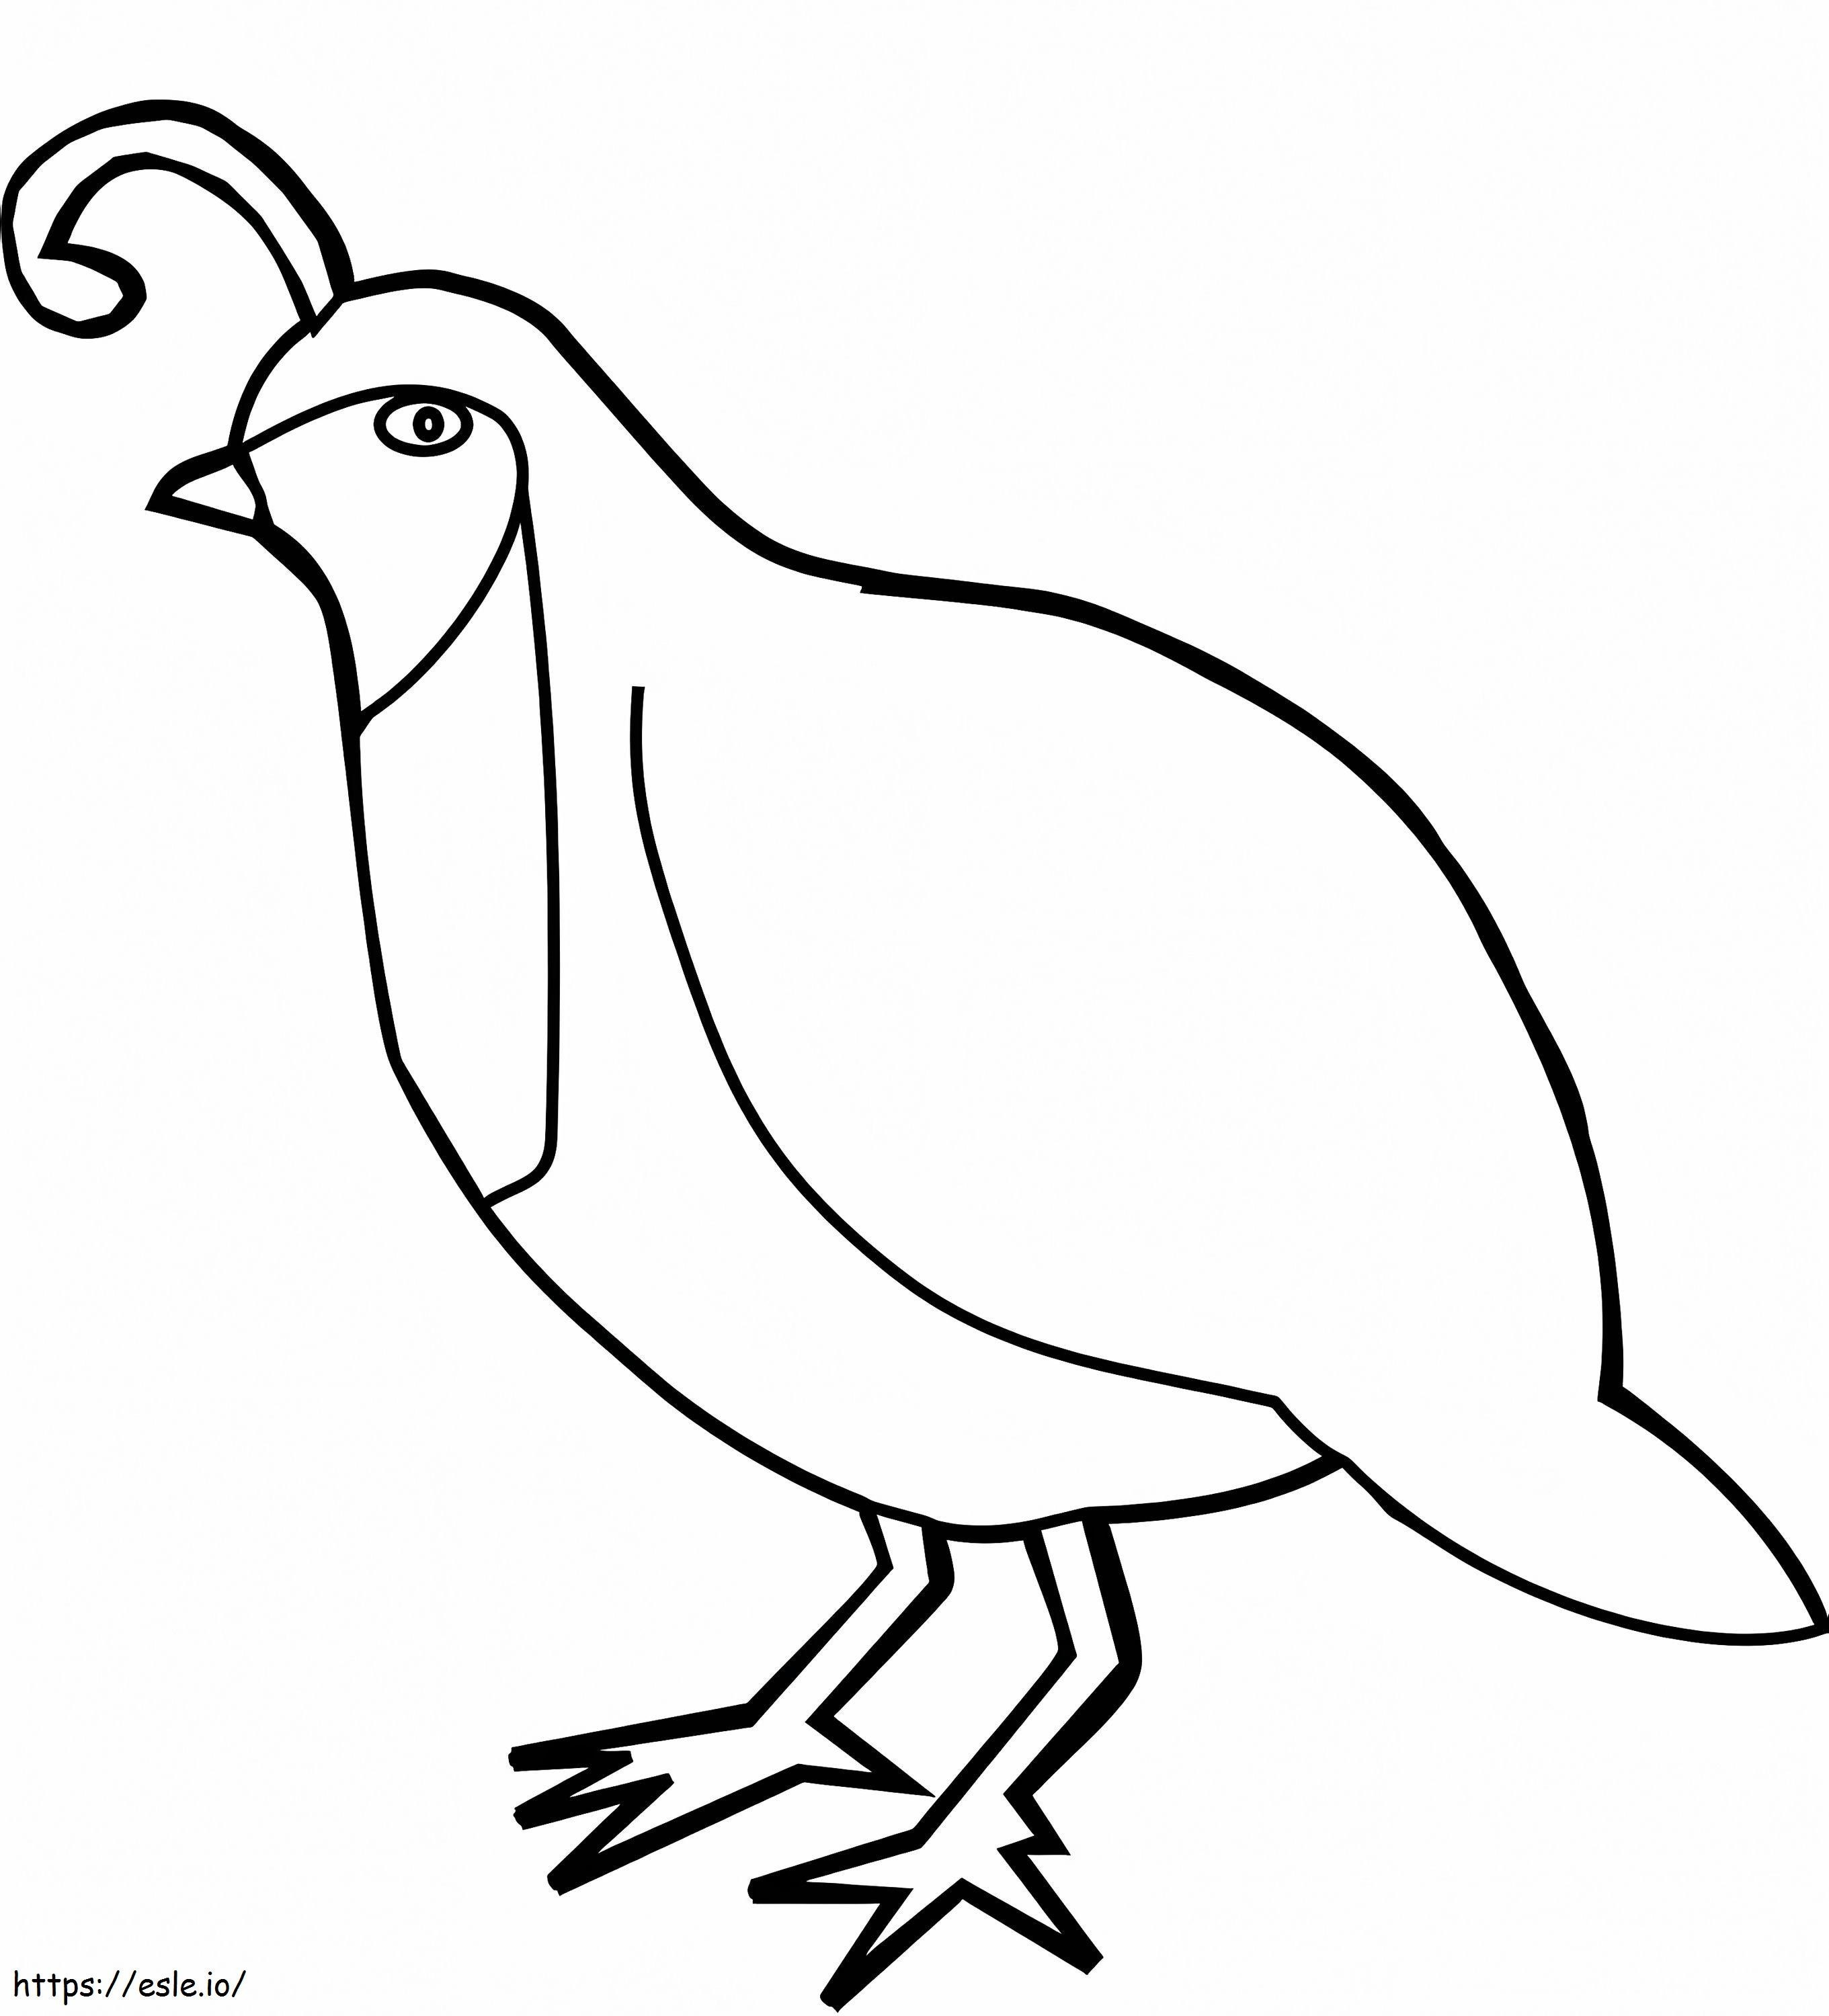 Quail Ground Dwelling Bird coloring page